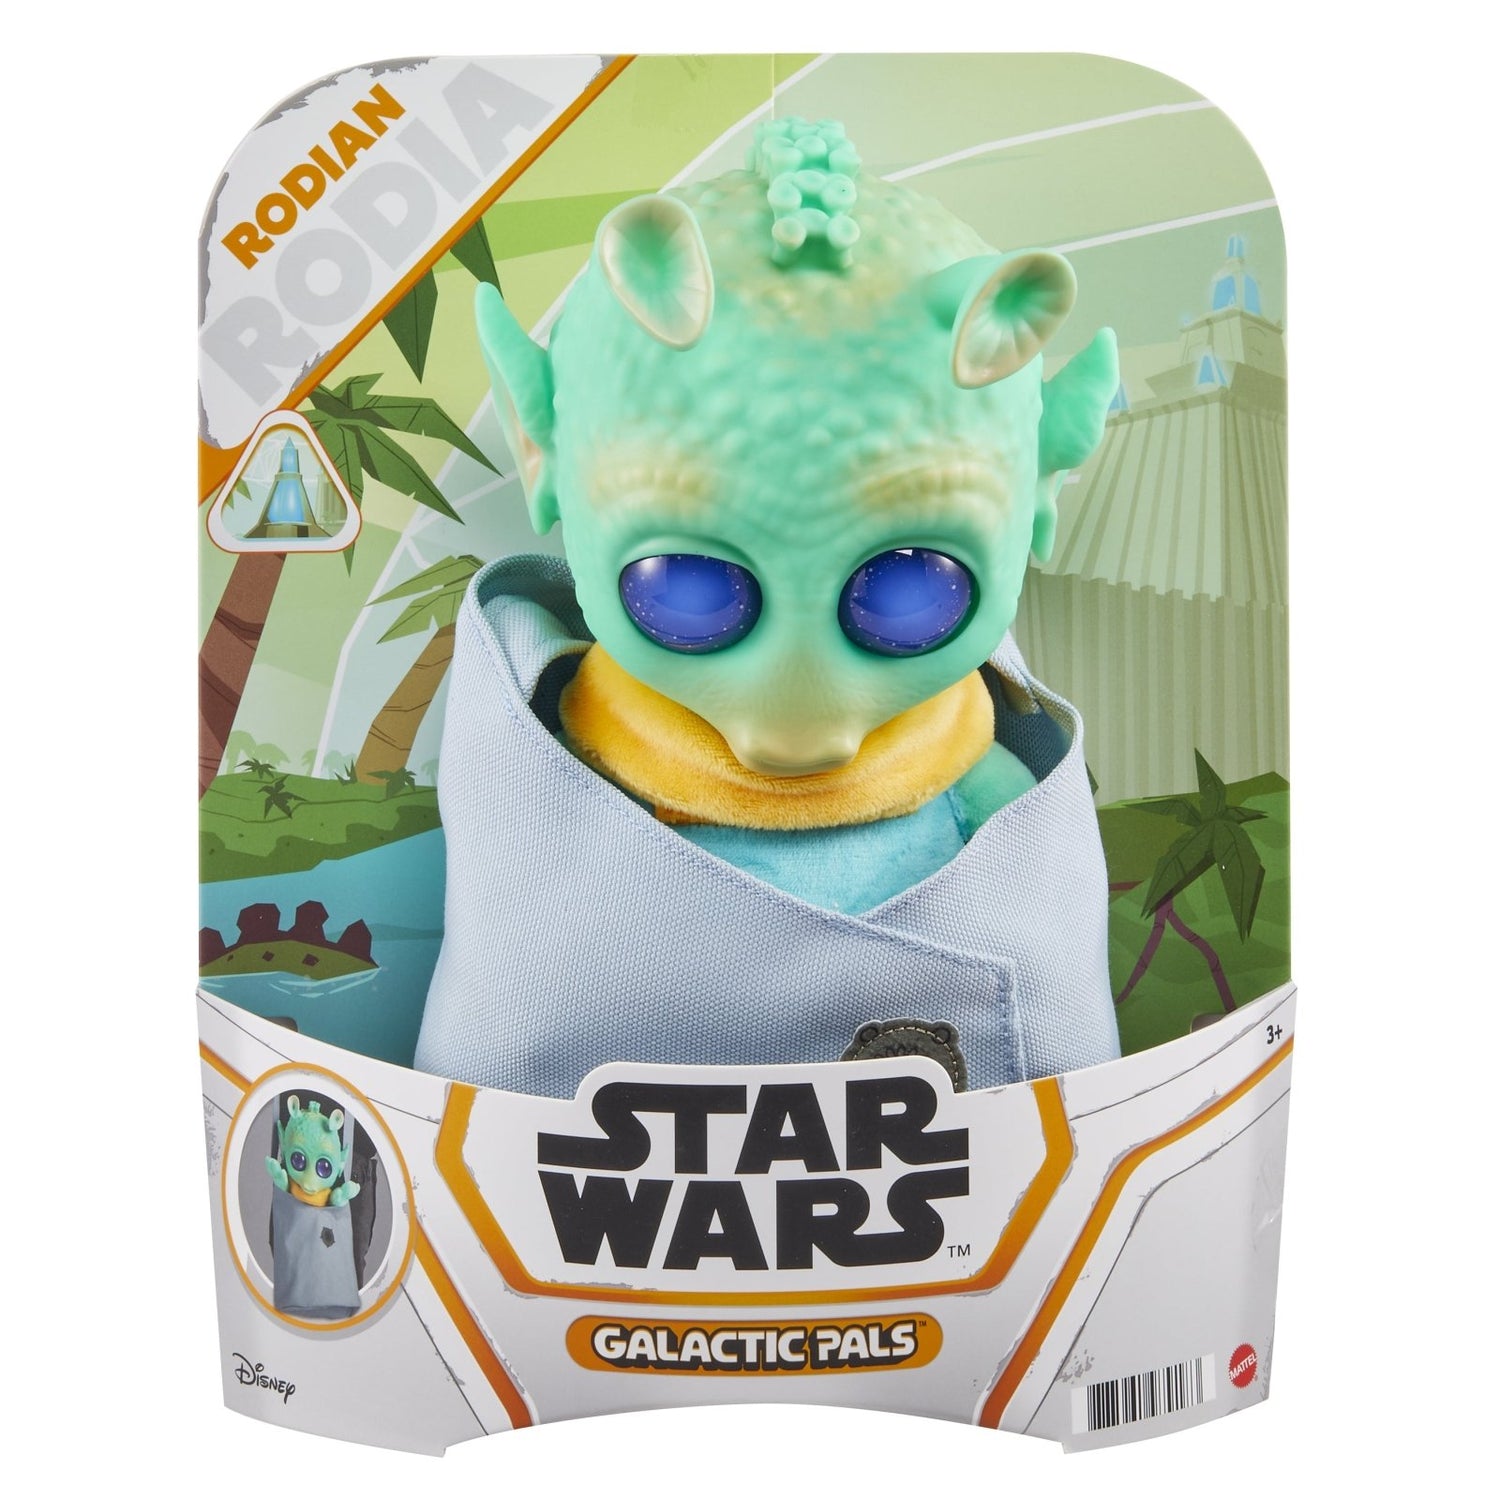 Star Wars: Galactic Pals Plushes - The Fourth Place